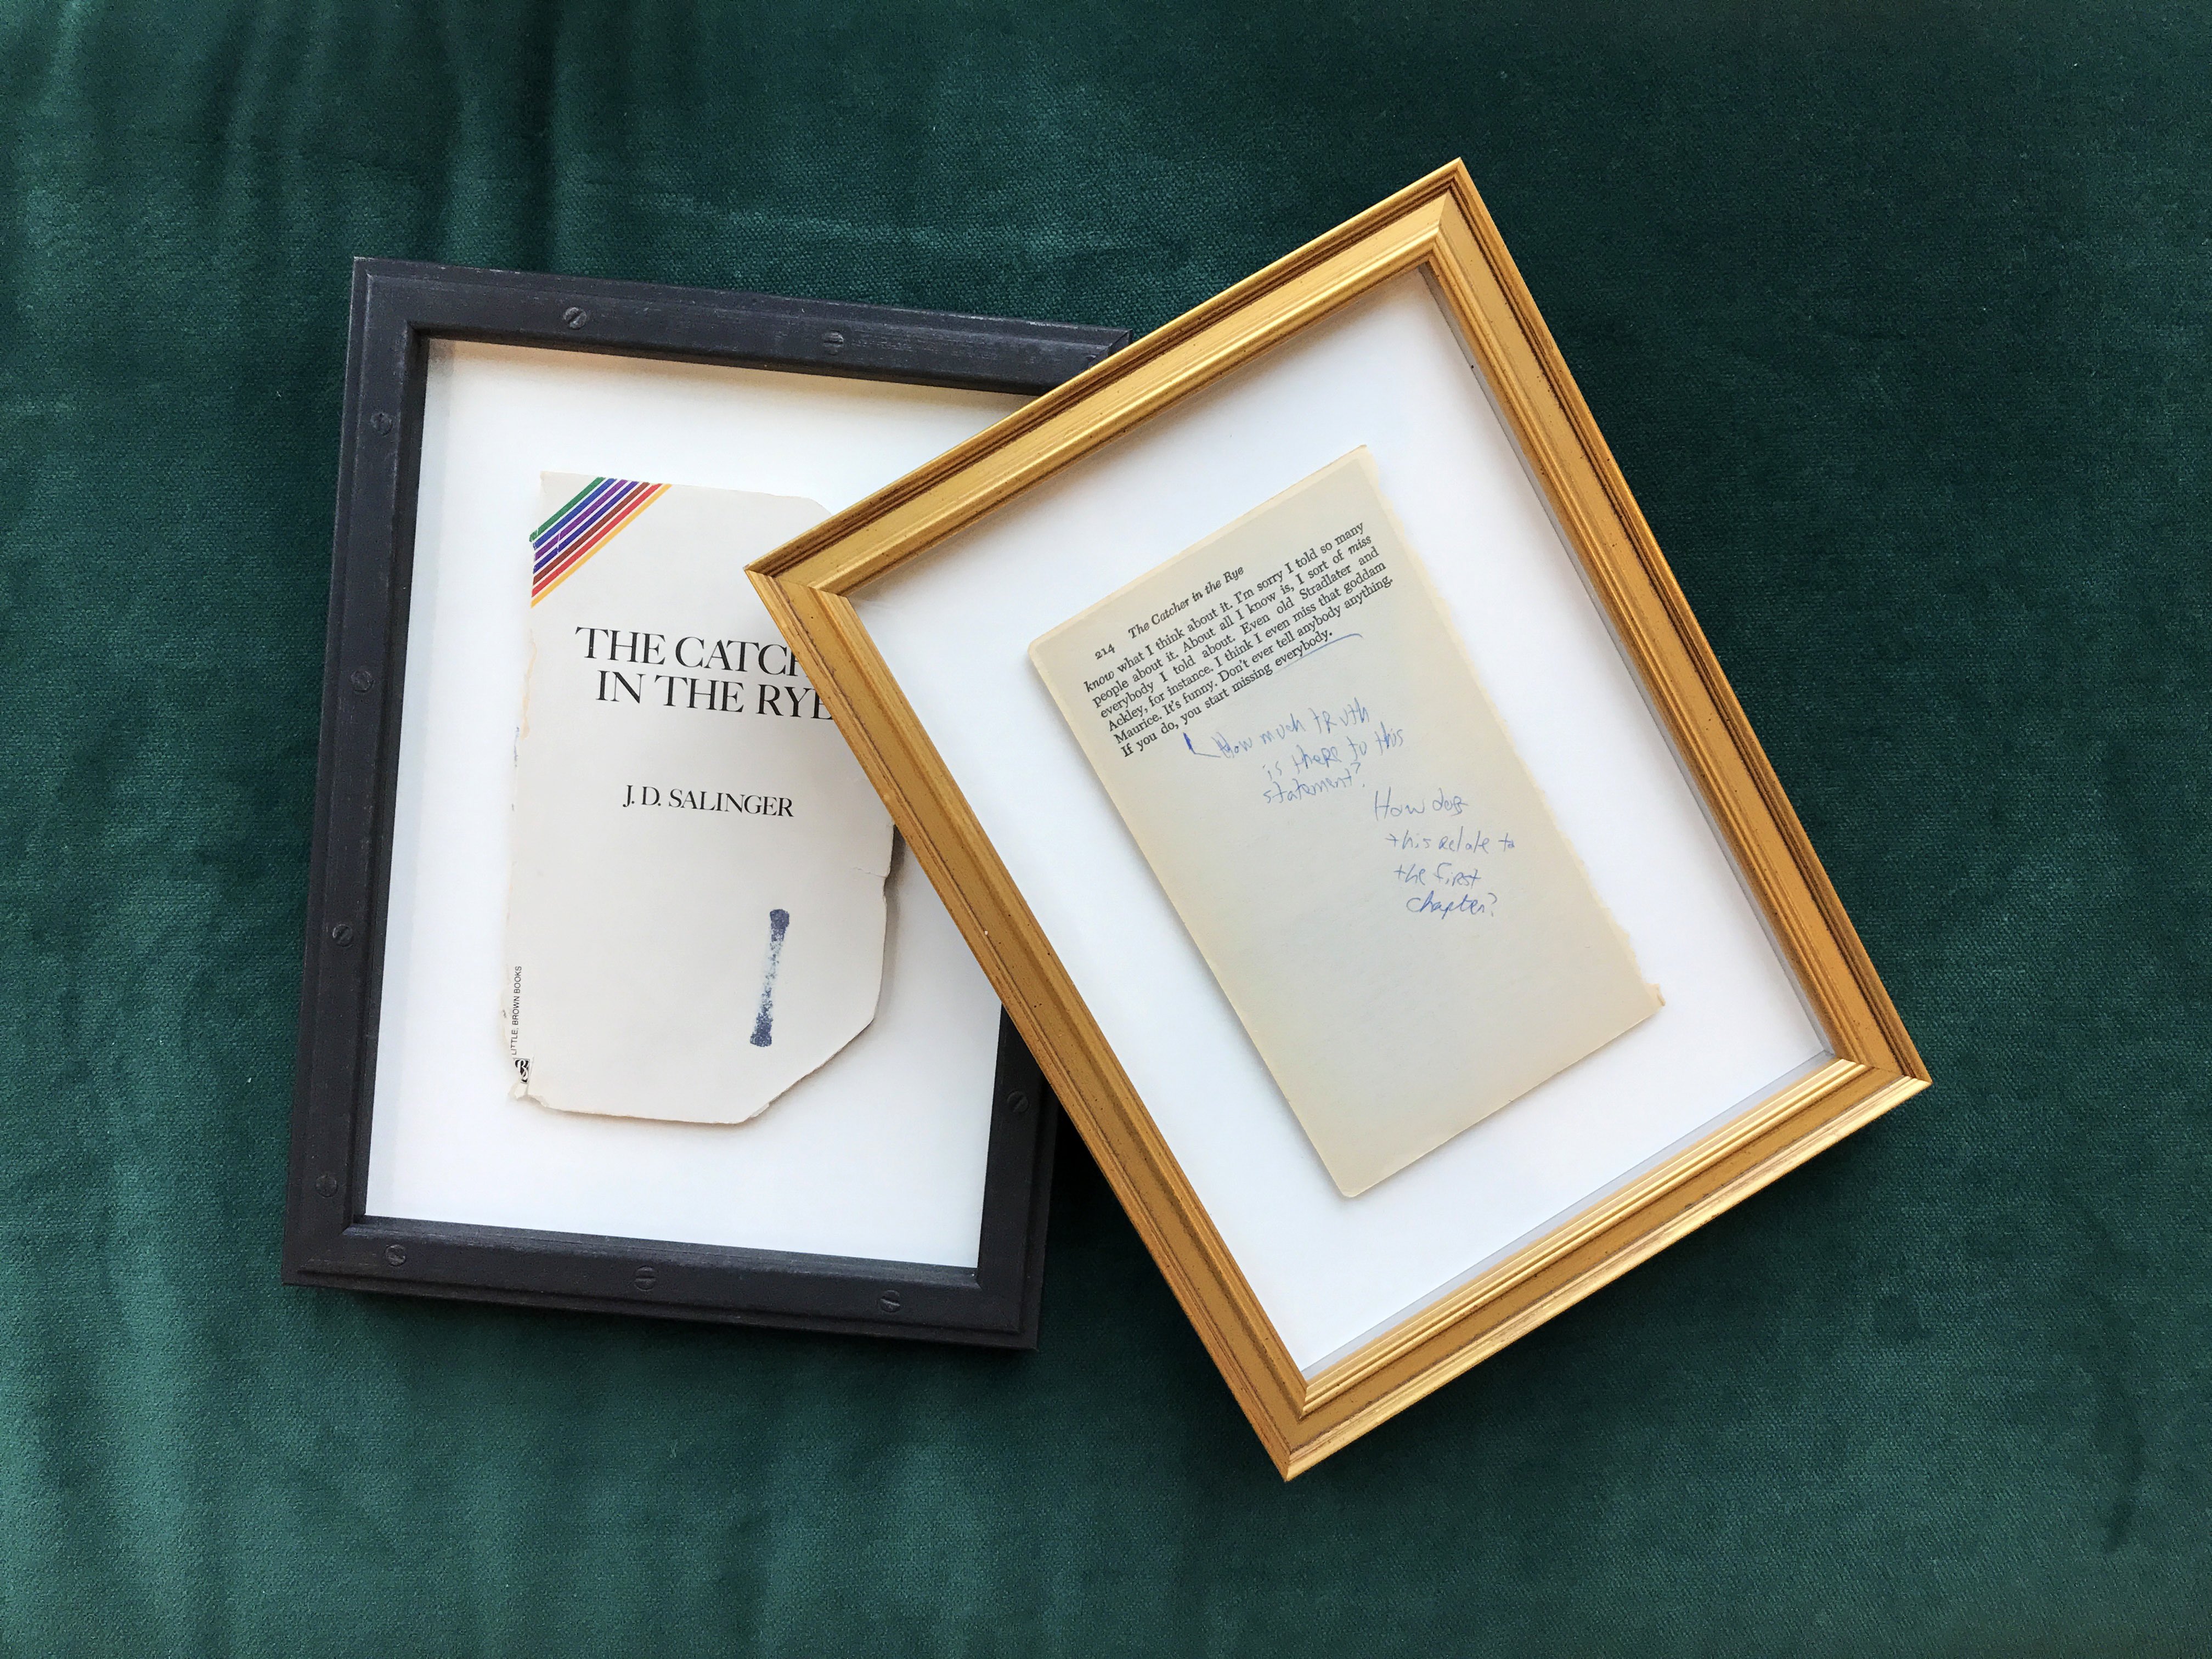 Framed Book Pages in Classic Gold and Black Frames, The Catcher in the Rye